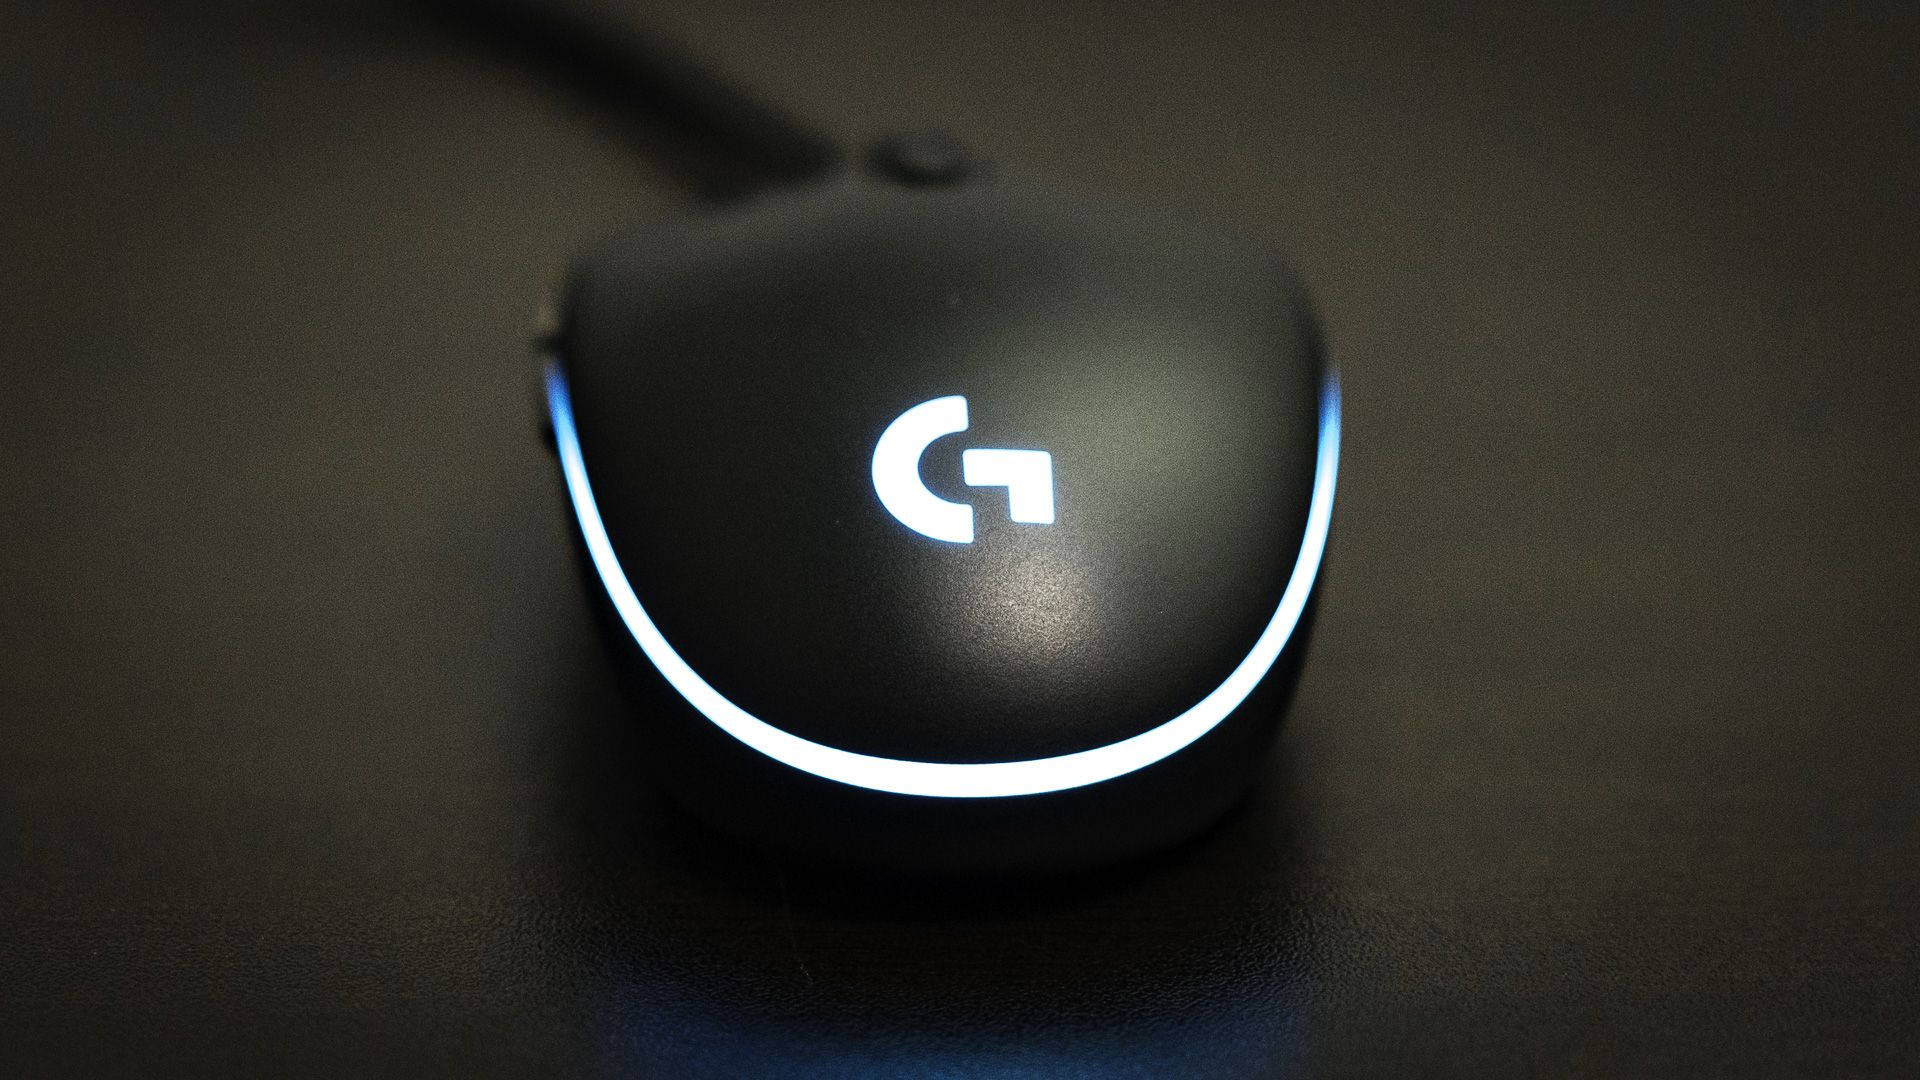 Logitech Mouse With Blue Light Background